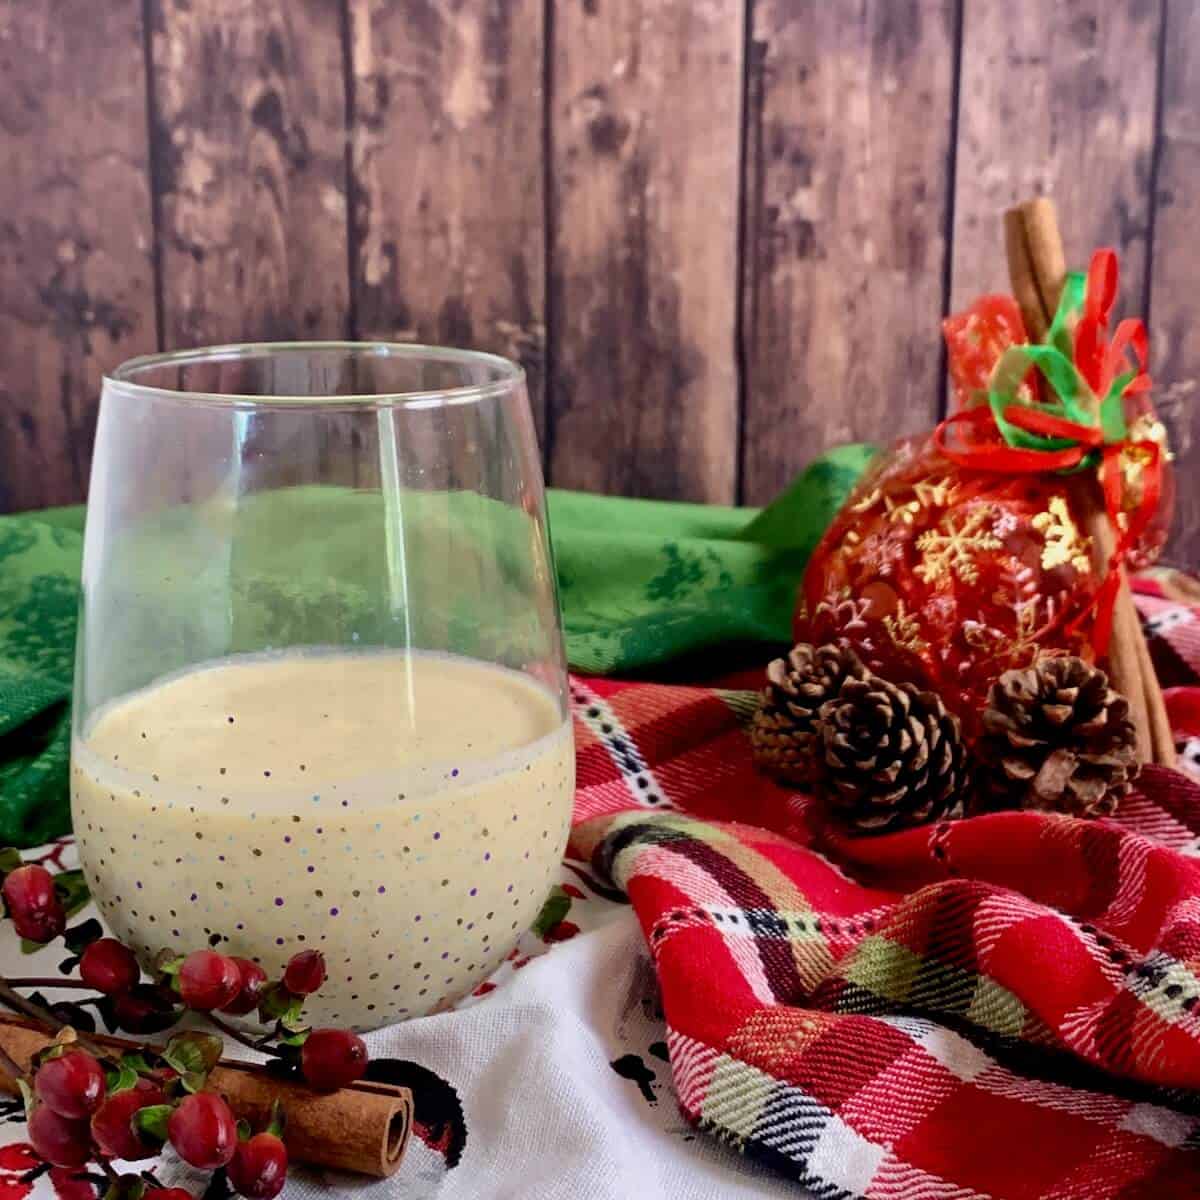 Glass of eggnog with pinecones & Christmas ornament on top of festive towels.